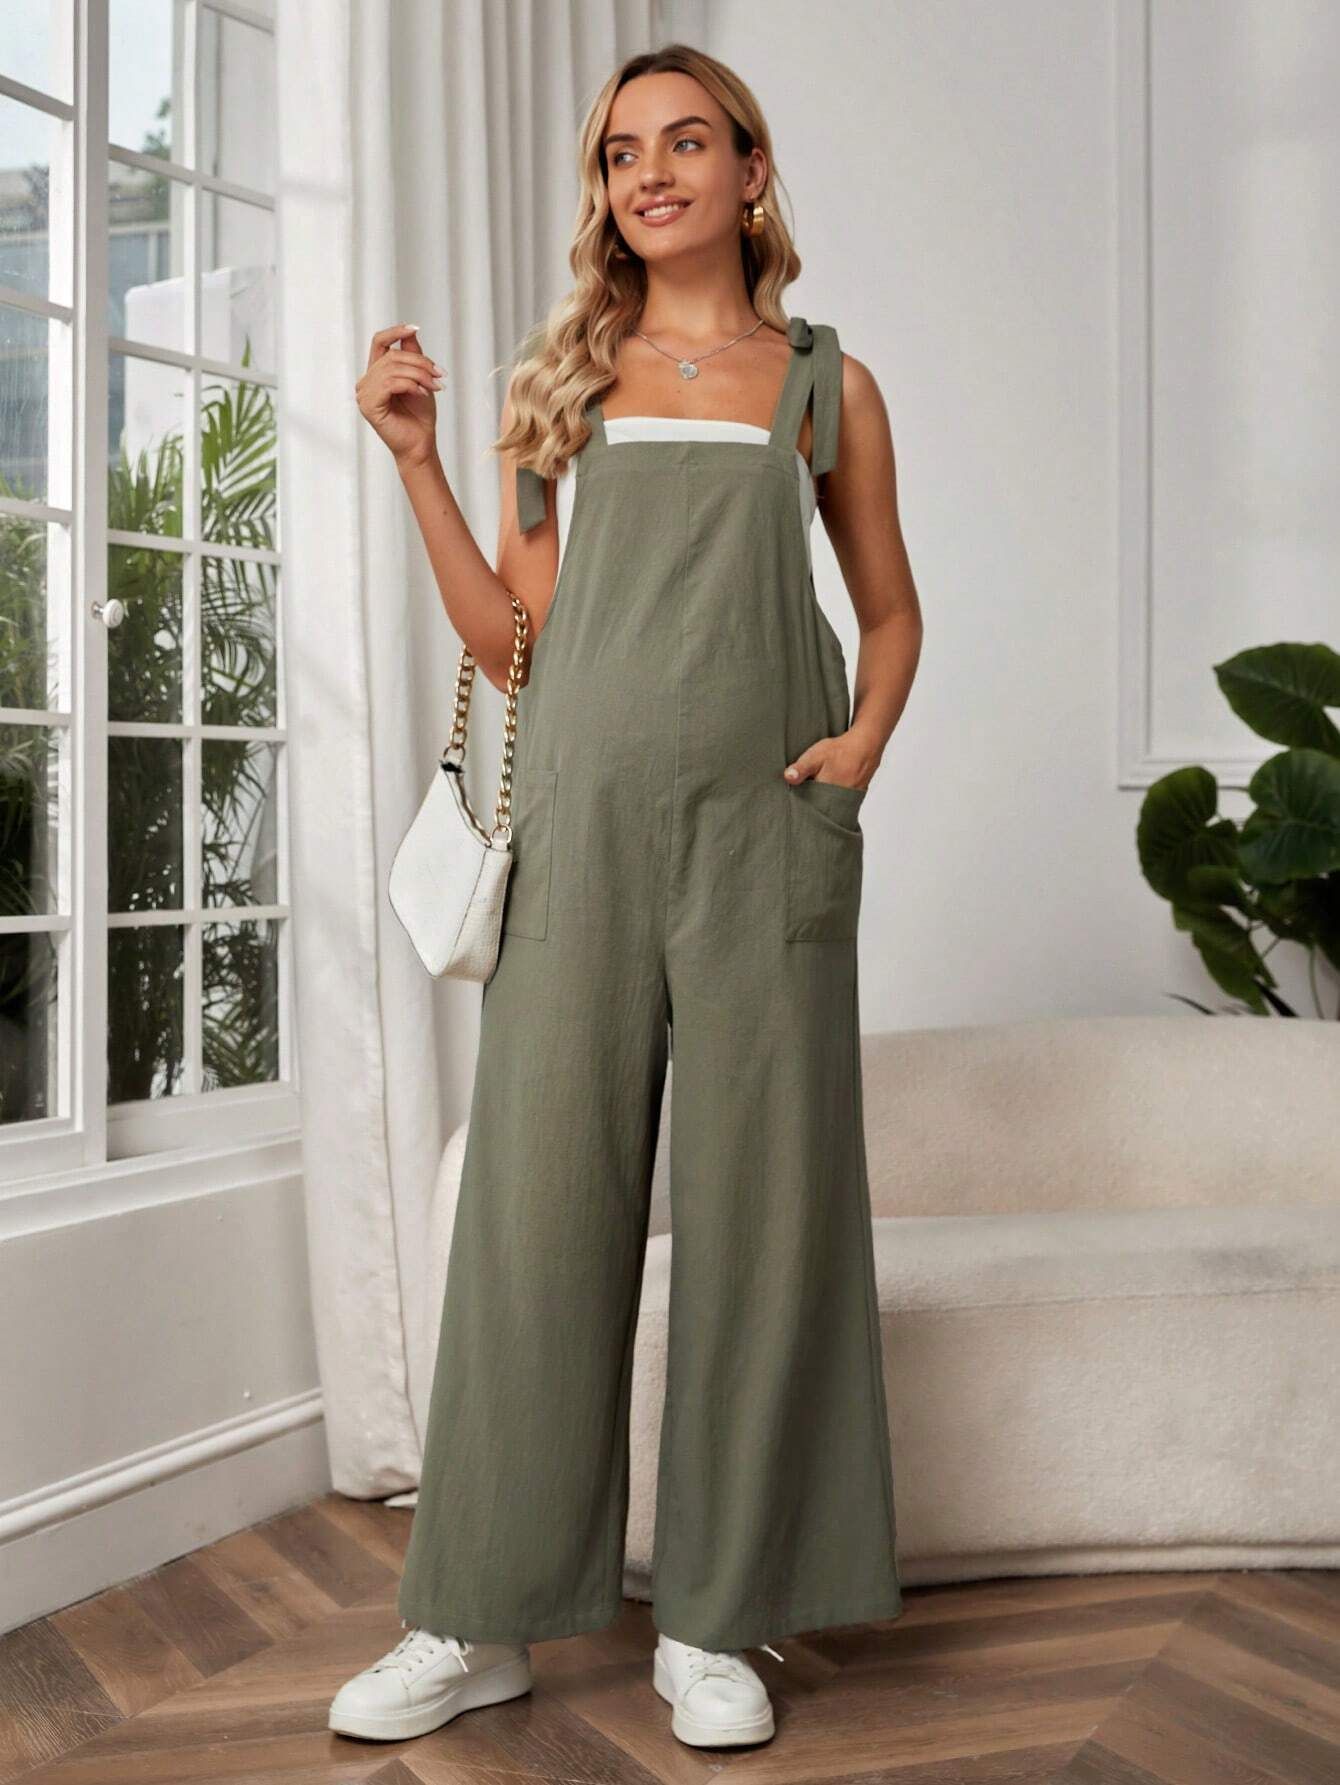 SHEIN Maternity Tie Shoulder Patch Pocket Wide Leg Overall Jumpsuit Without Tube Top | SHEIN